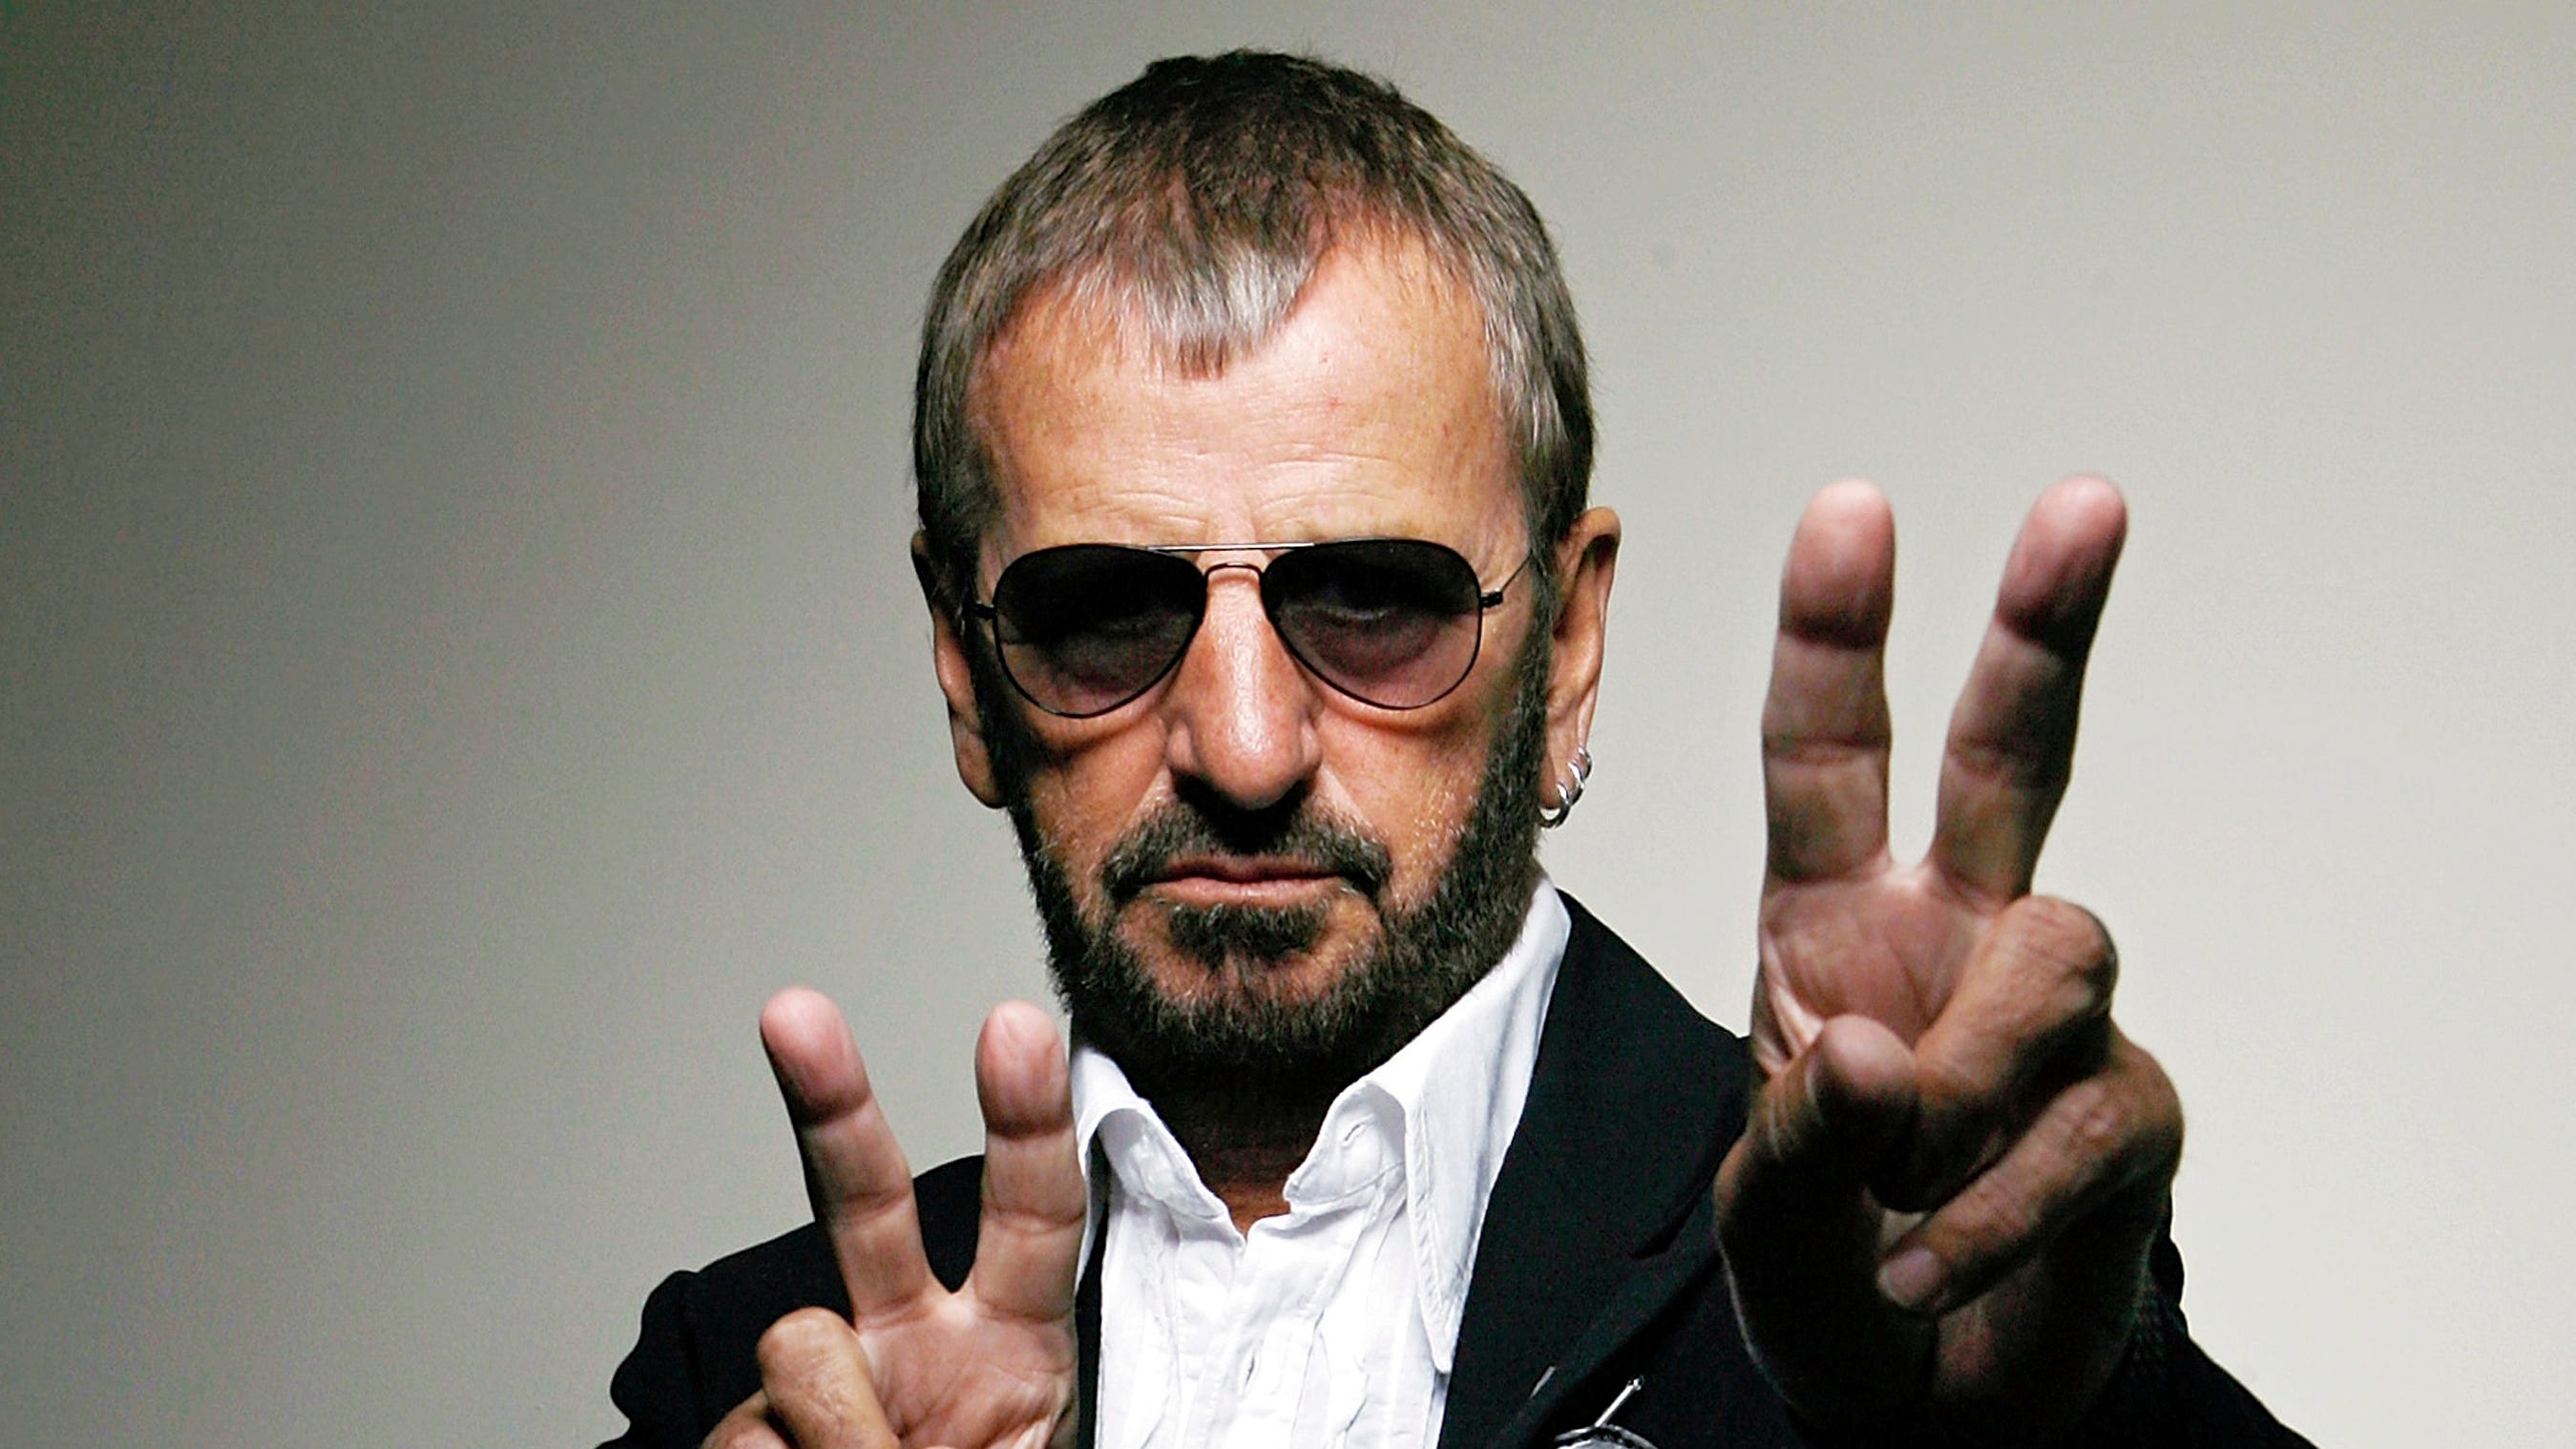 Ringo Starr drops new song, announced new EP recorded during lockdown